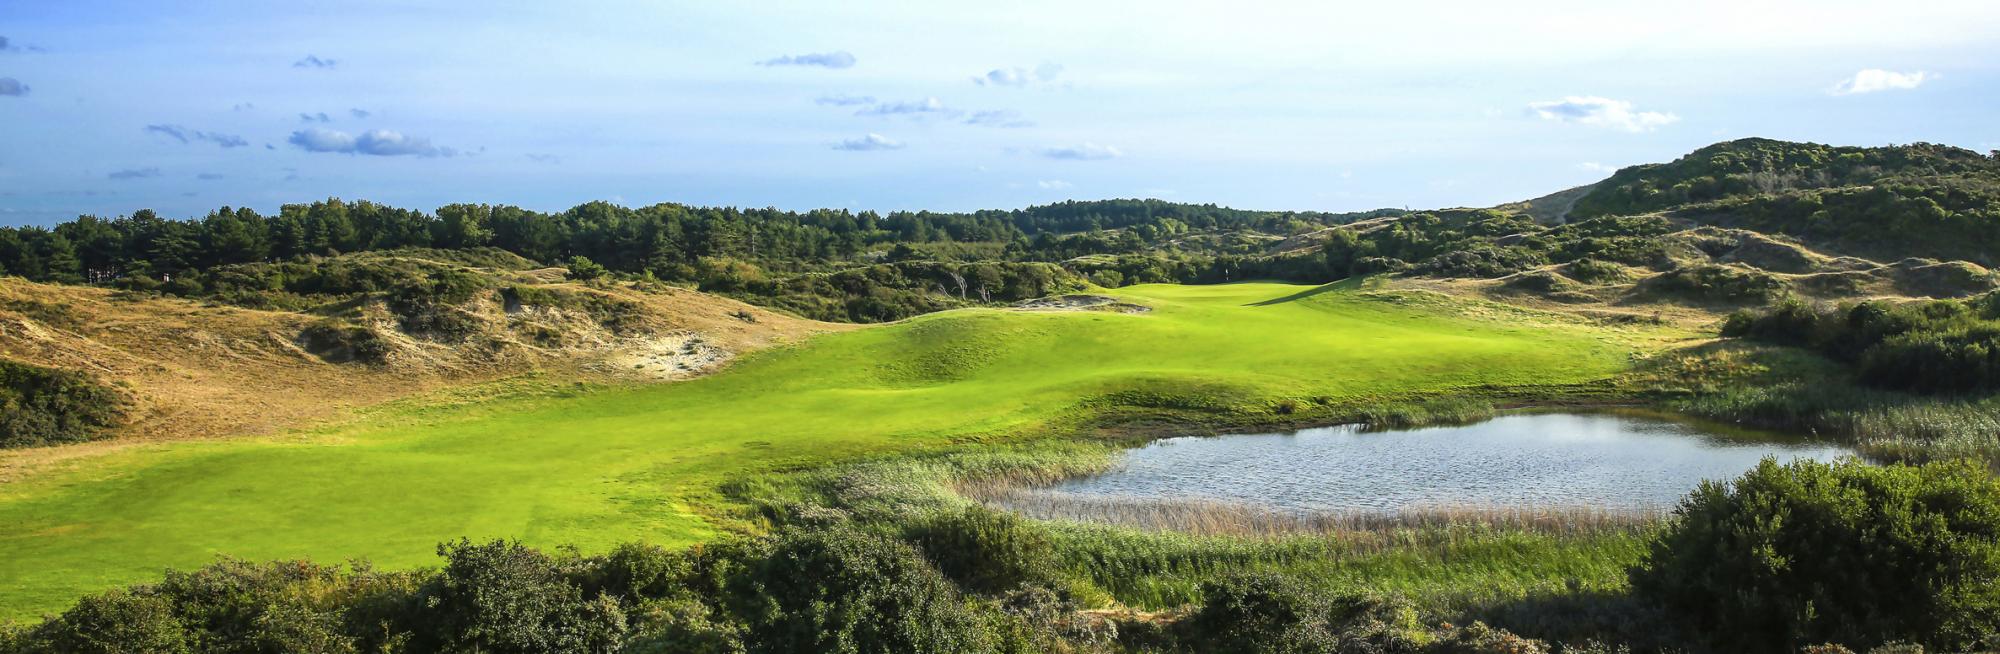 Golf de Belle Dune has lots of the most desirable golf course in Northern France